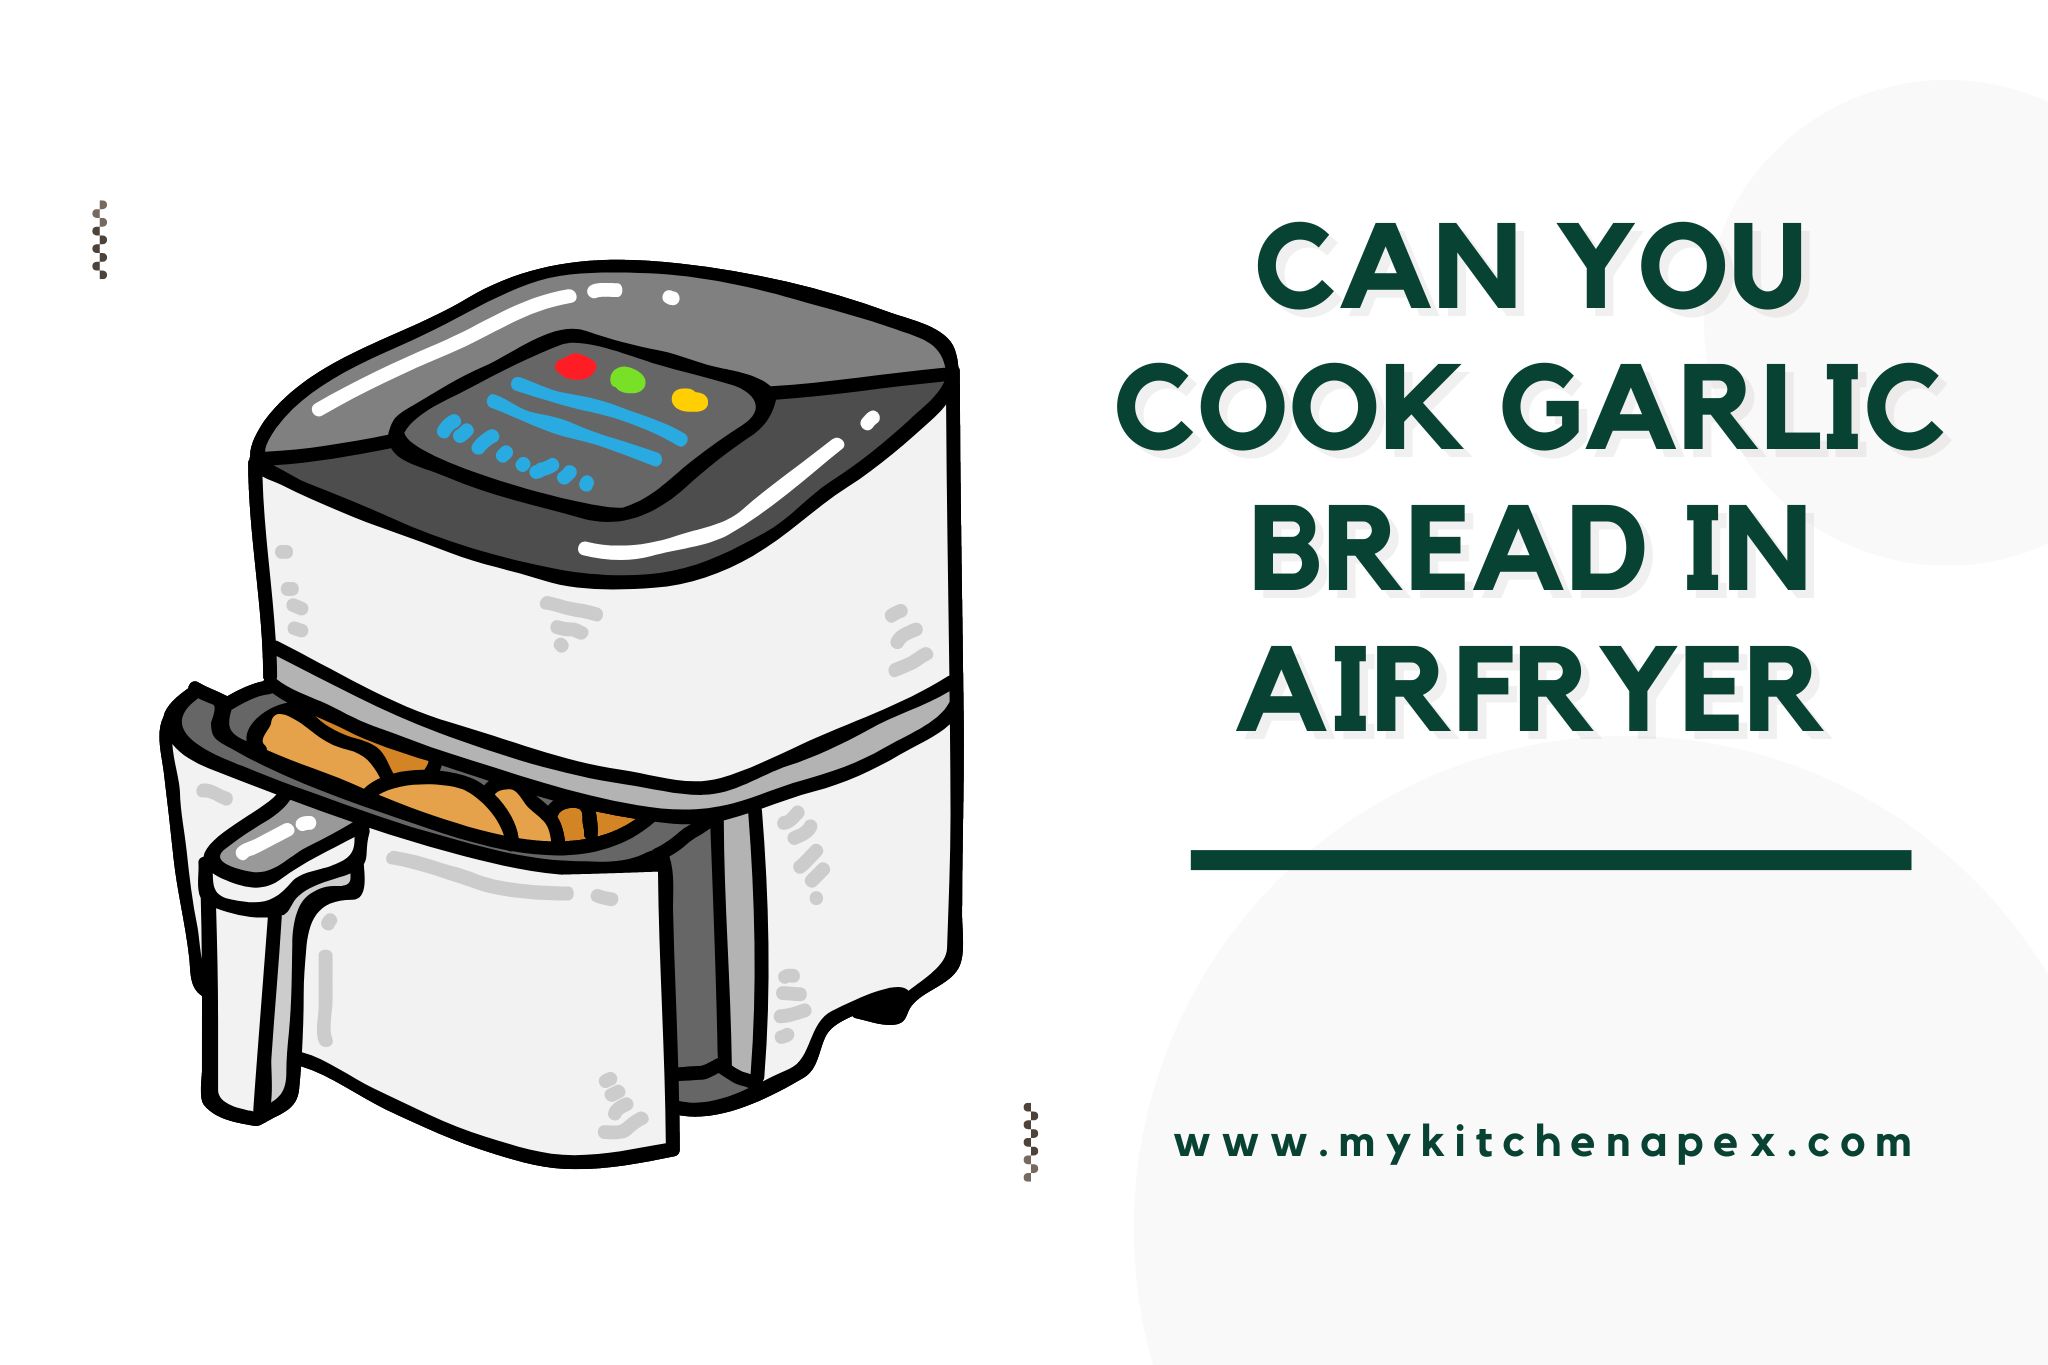 can you cook garlic bread in airfryer